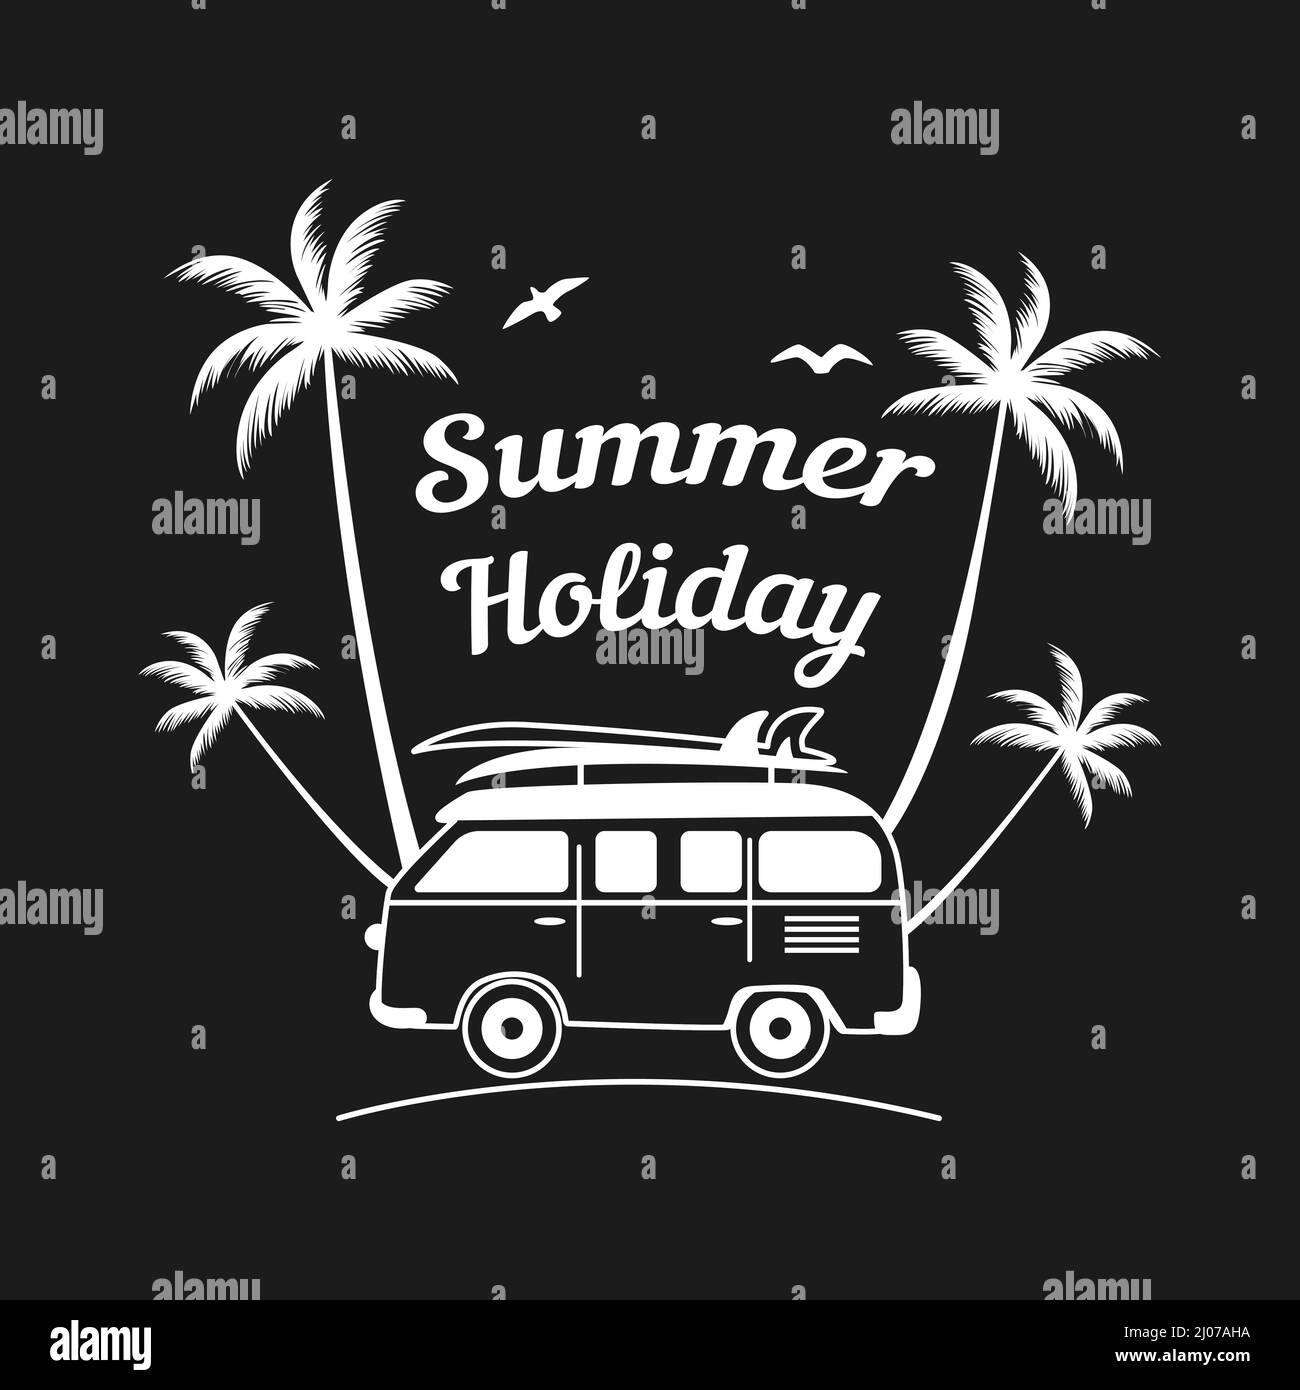 Badge with palm trees, SUMMER HOLIDAY lettering and a surfing car. Outline vector illustration for t-shirt prints, posters and other uses. Stock Vector